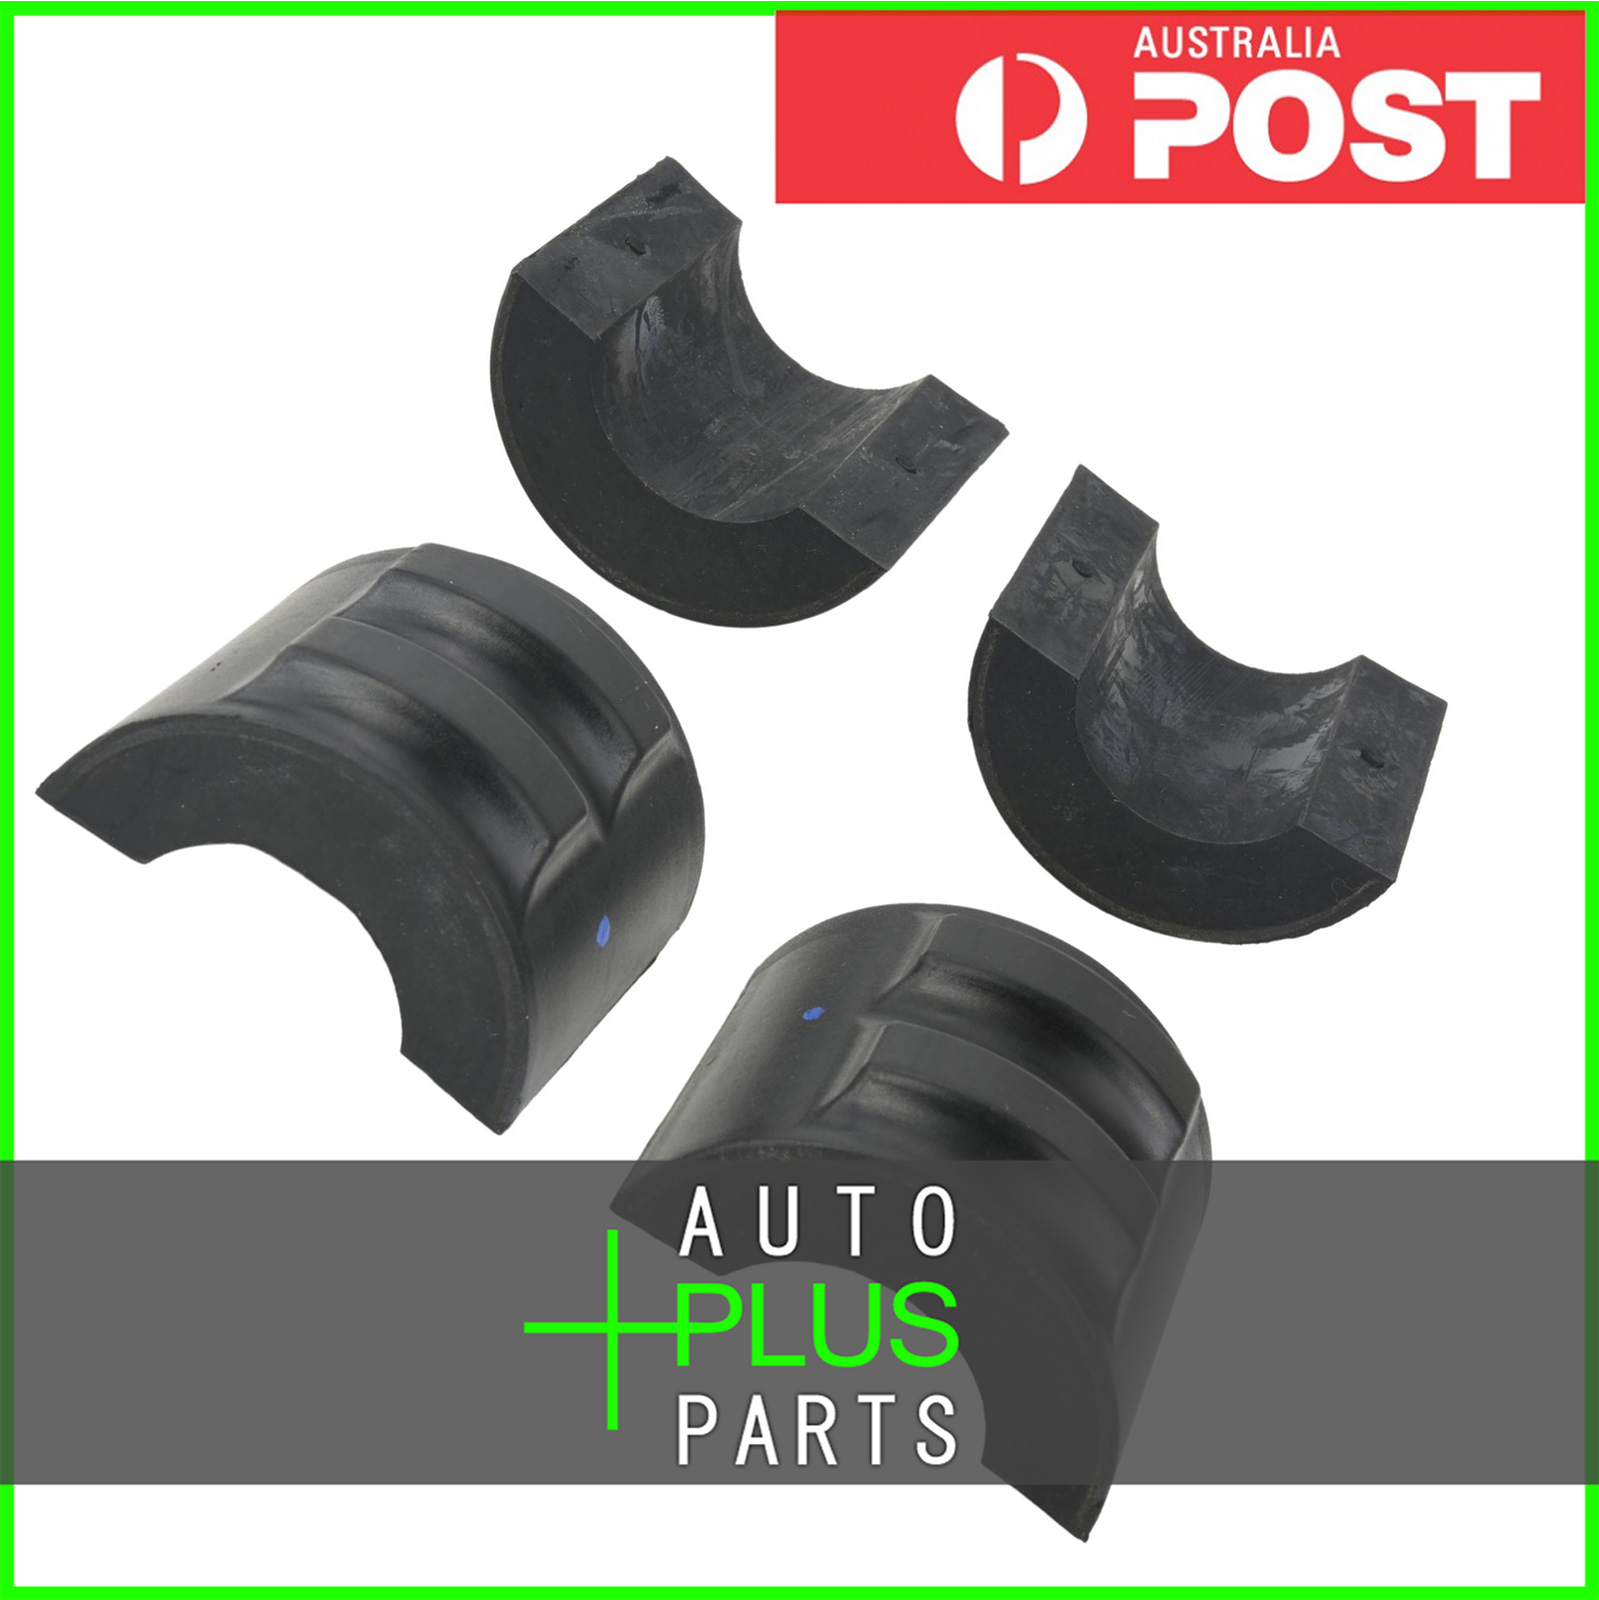 Fits MERCEDES BENZ S 320 CDI 4MATIC / S 350 CDI 4MATIC FRONT STABILIZER BAR BUSH Product Photo